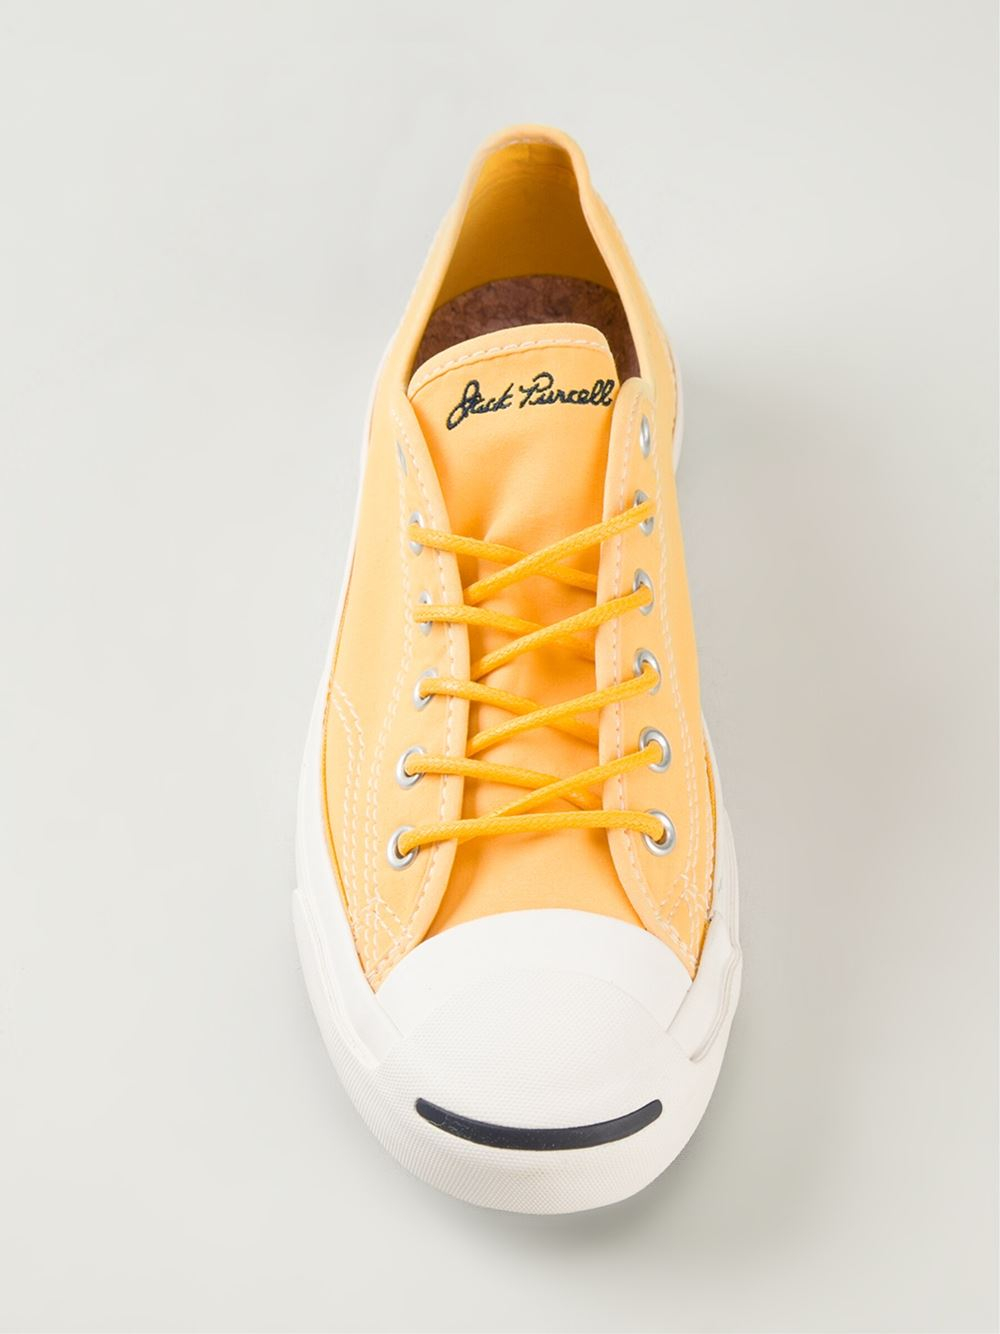 converse jack purcell yellow Online 